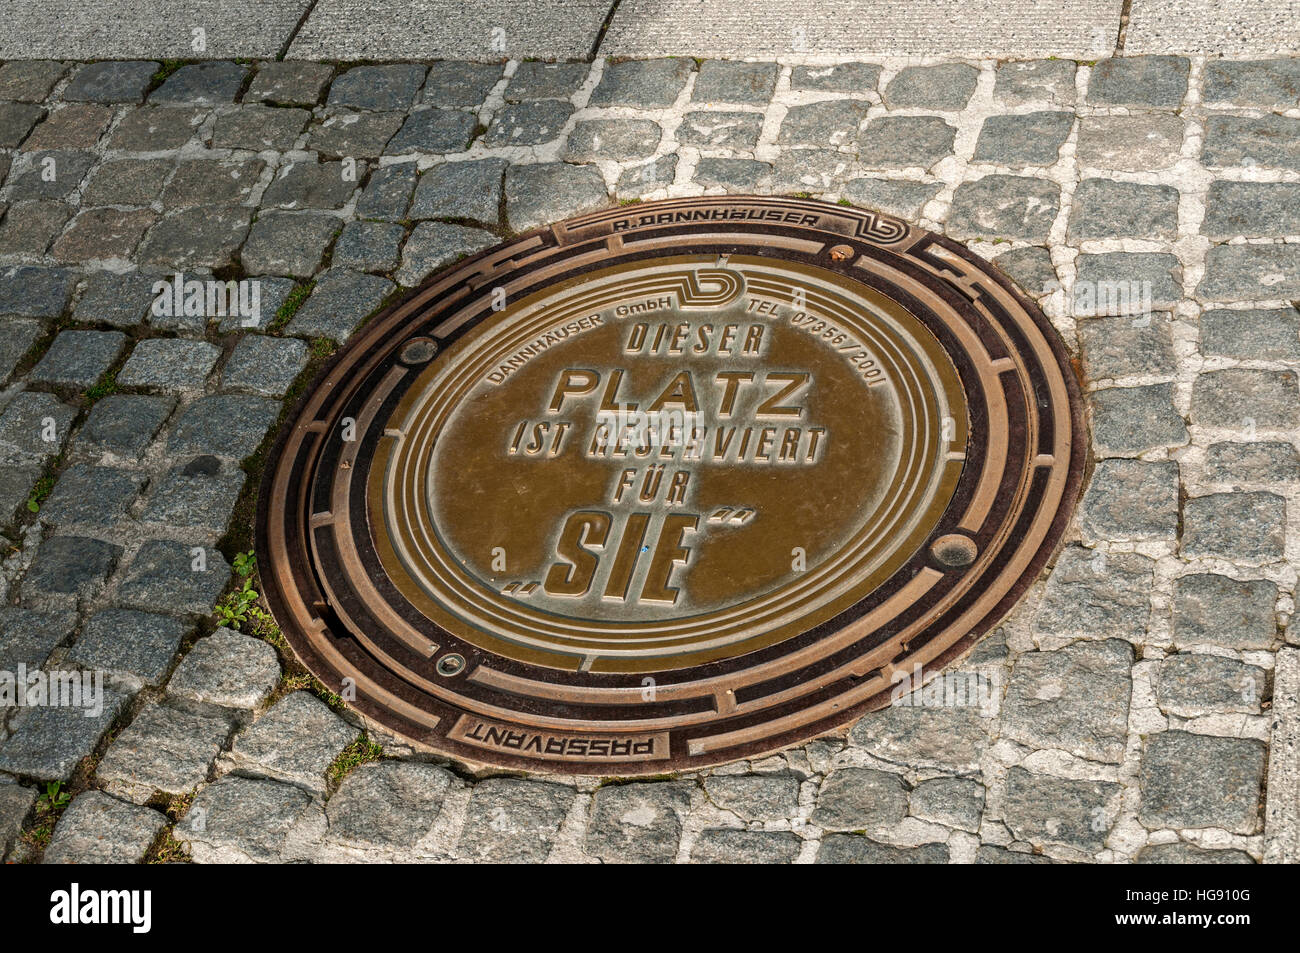 Man-hole cover with self promotion, Germany. Stock Photo